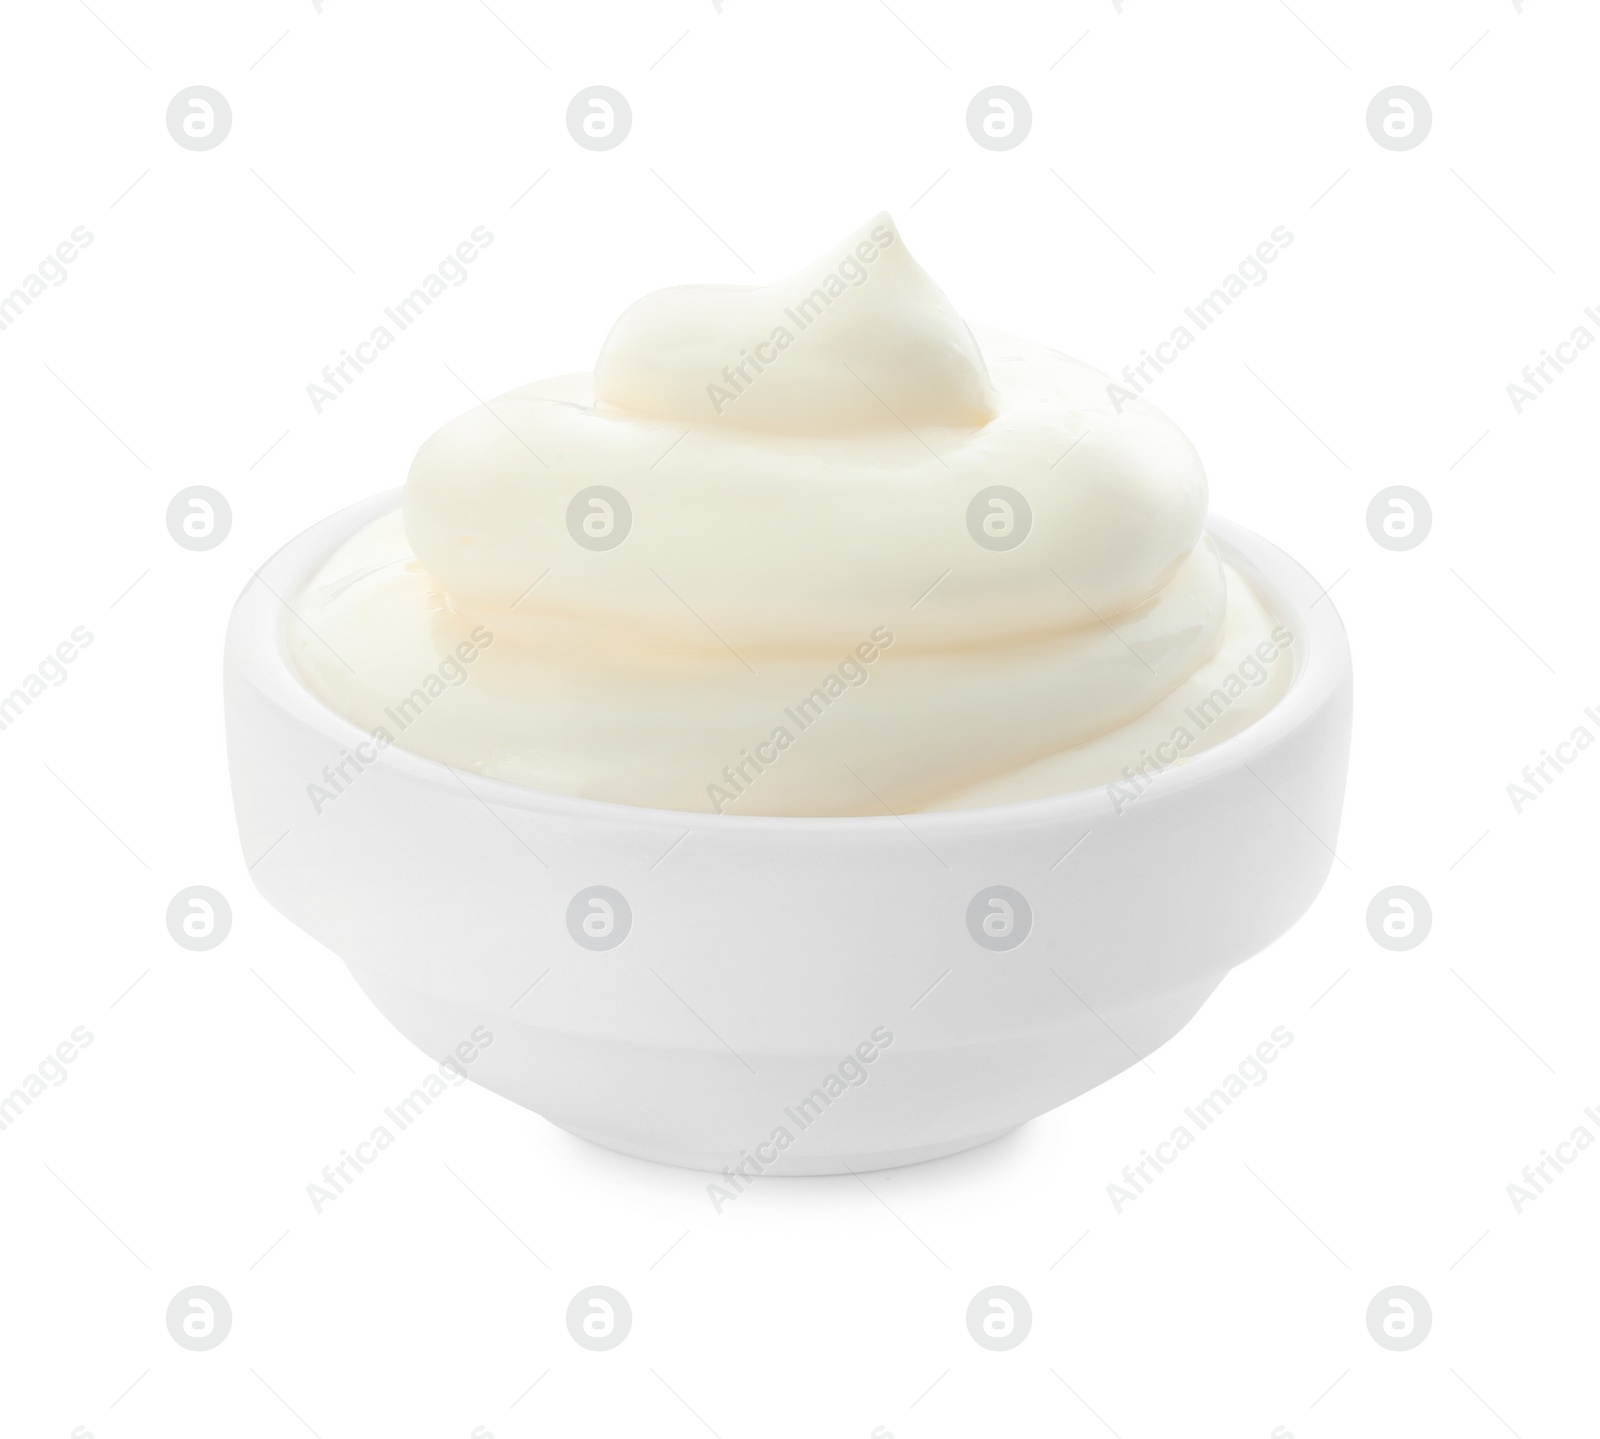 Photo of Tasty fresh mayonnaise sauce in bowl isolated on white